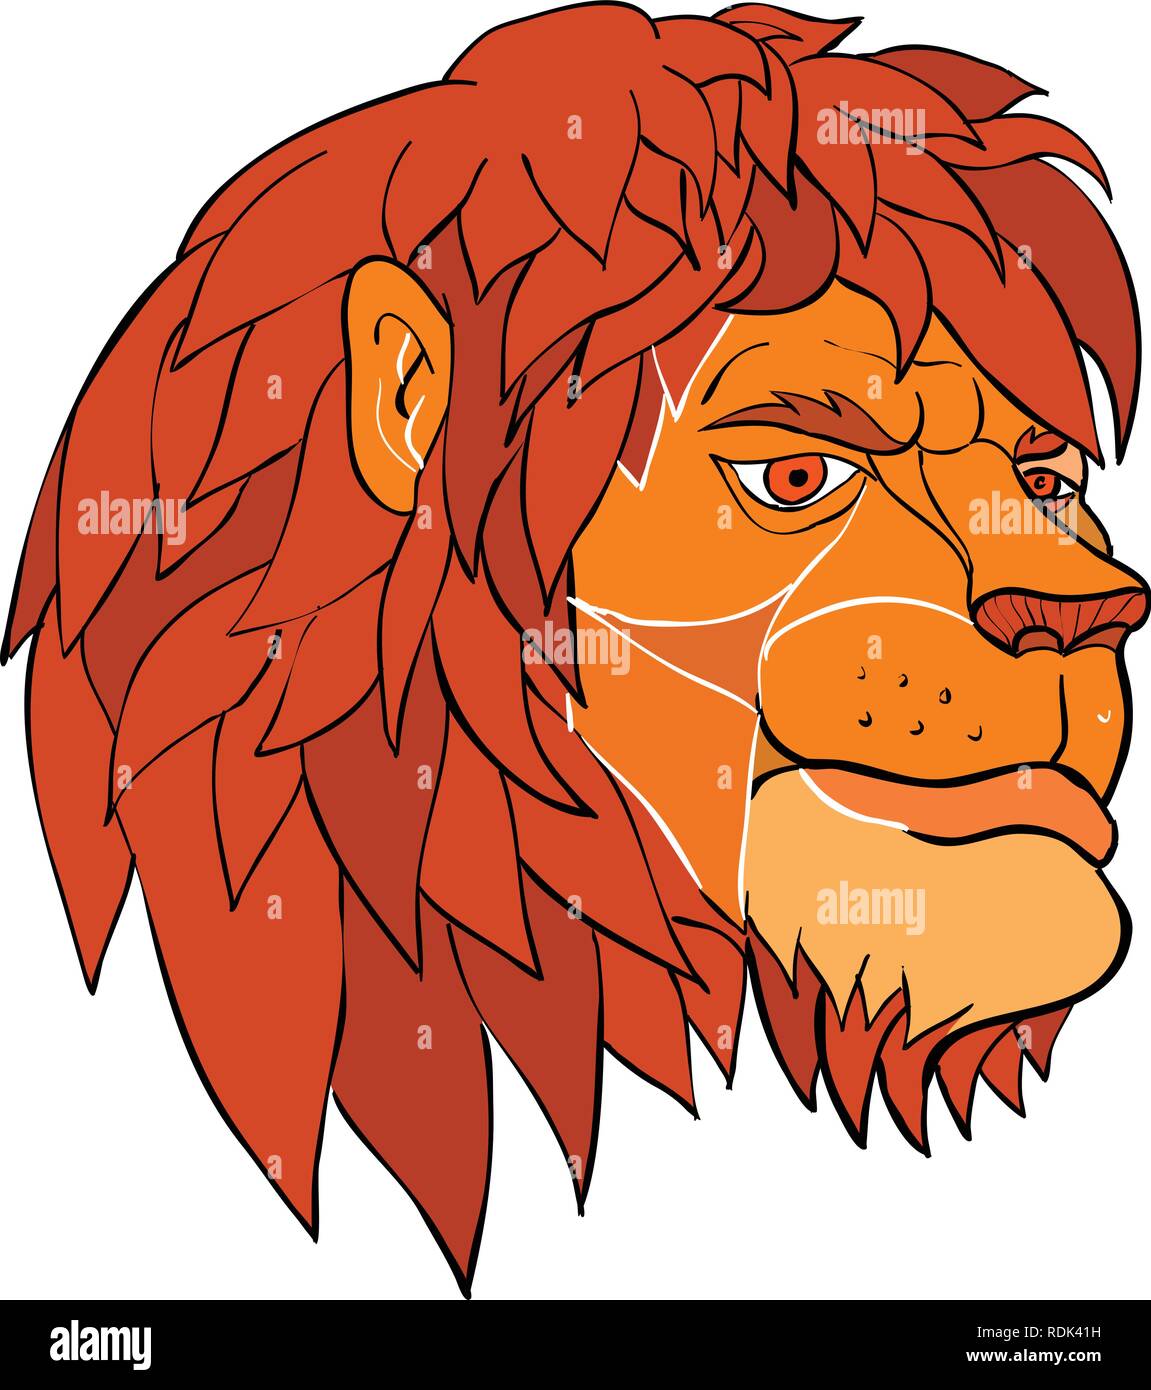 Cartoon style illustration of a head of a lion with full mane ruminating in  pensive mood viewed from side on isolated background in color Stock Vector  Image & Art - Alamy